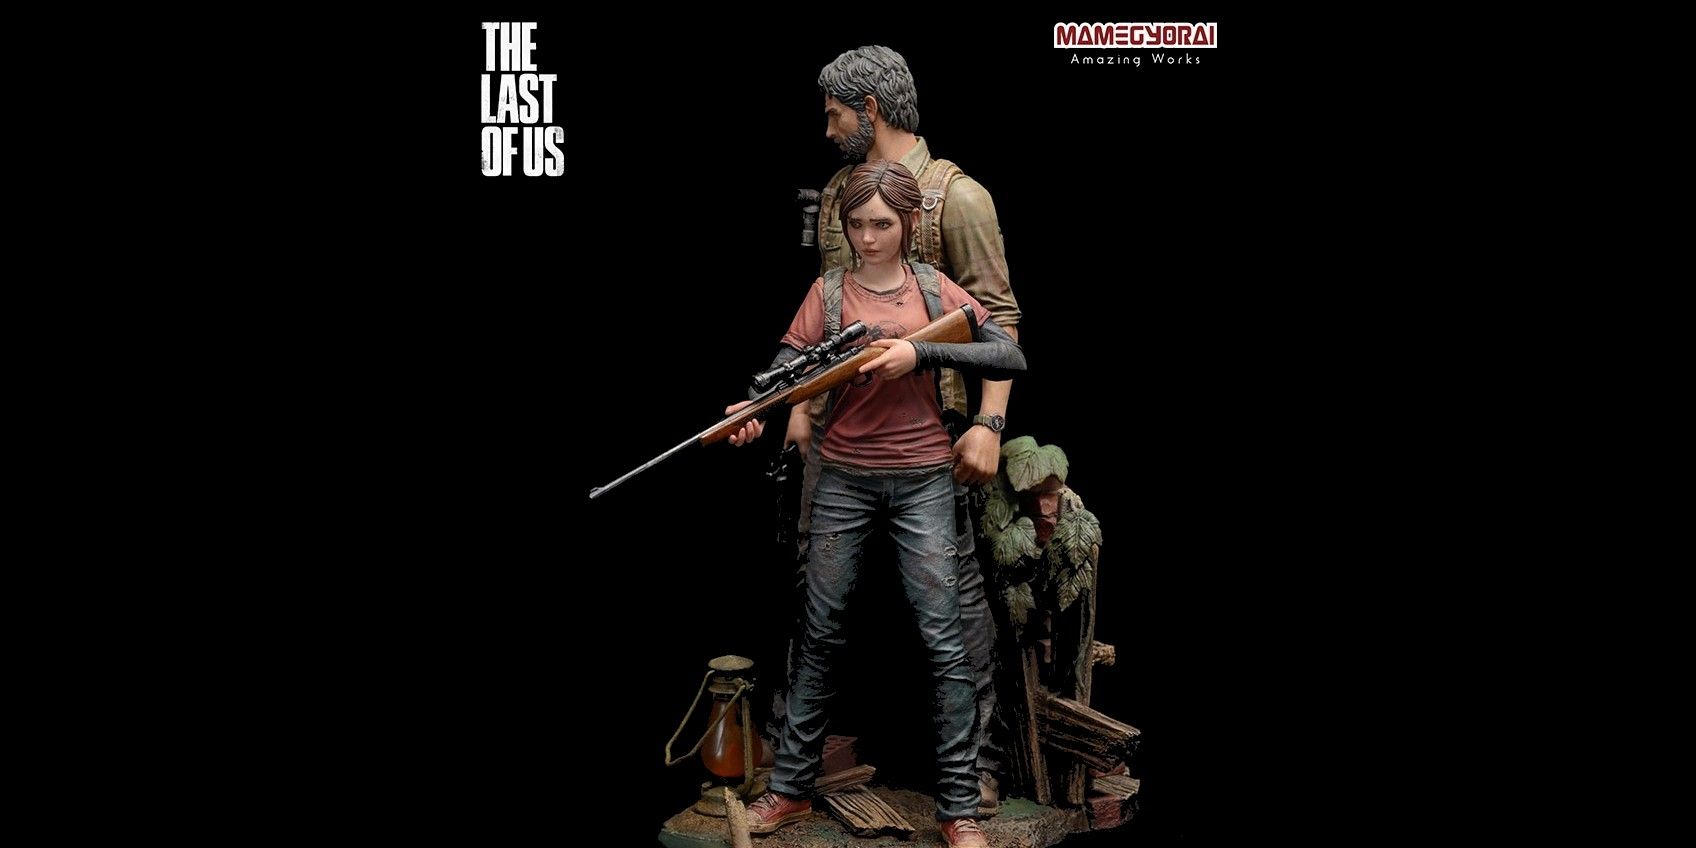 Sideshow Collectibles statue of Joel and Ellie from The Last of Us